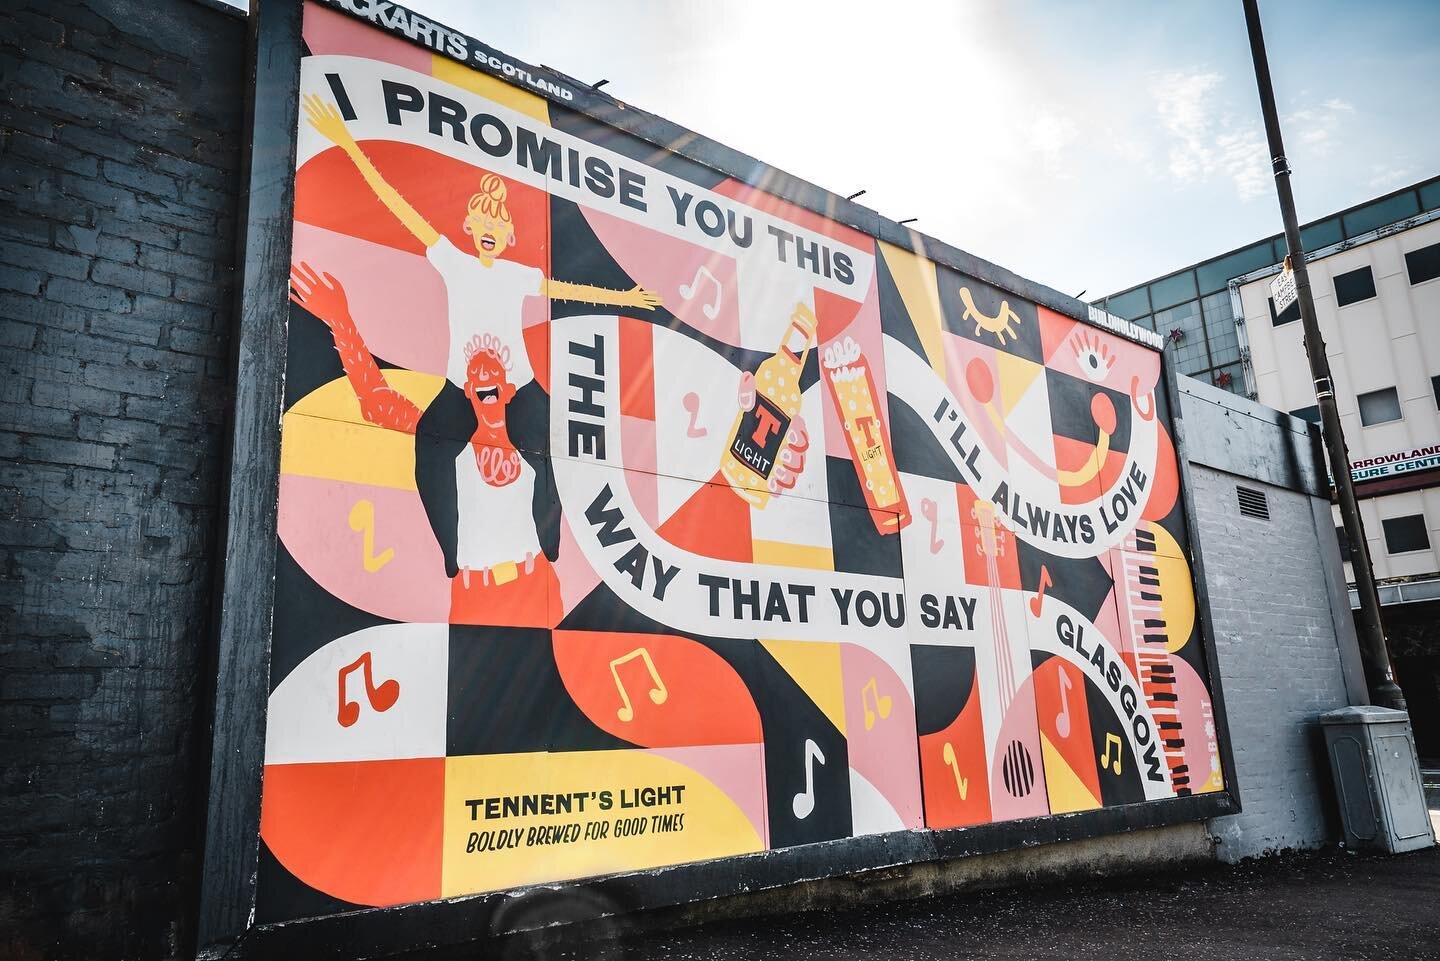 Back in September Glasgow&rsquo;s favourite lager asked us to paint a billboard for Glasgow&rsquo;s favourite band for their upcoming gig at Glasgow&rsquo;s favourite music venue. Here&rsquo;s what we came up with&hellip;